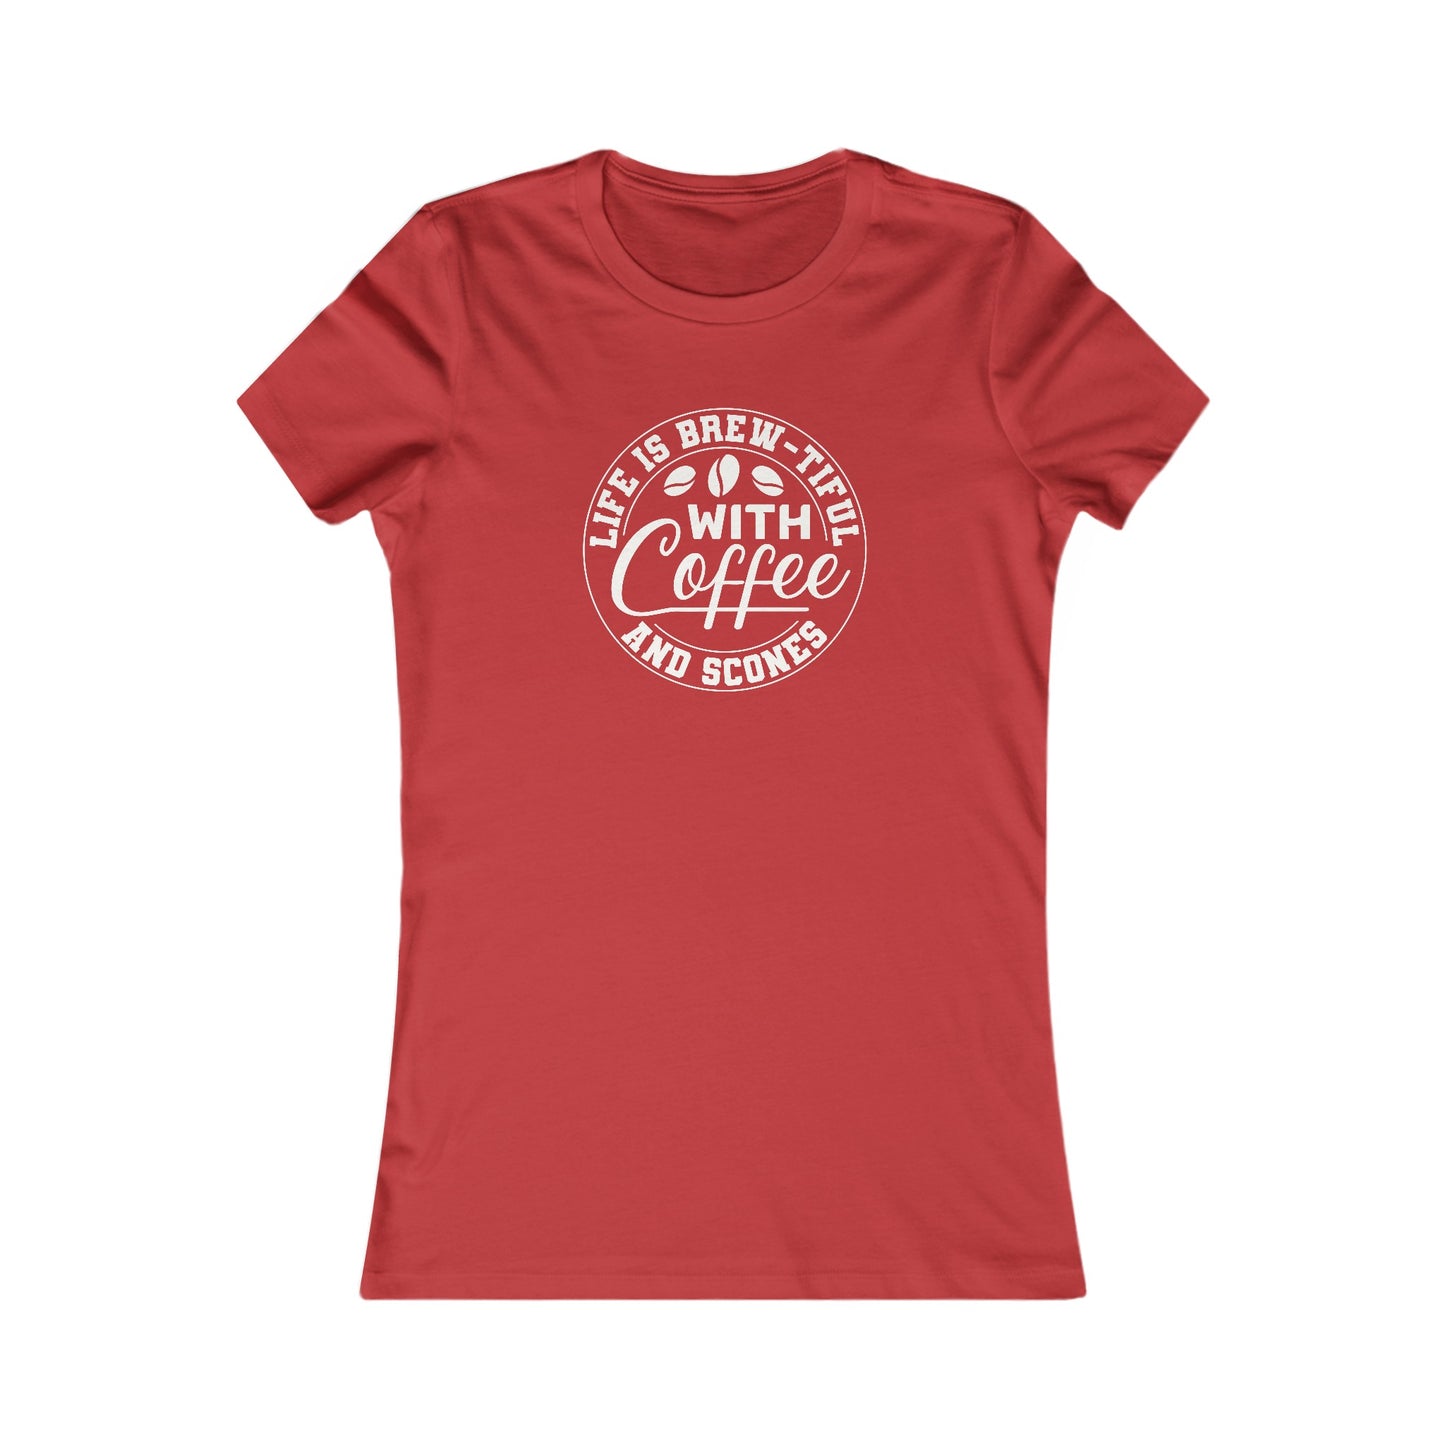 Life is Brew-tiful with Coffee and Scones Women's T-Shirt